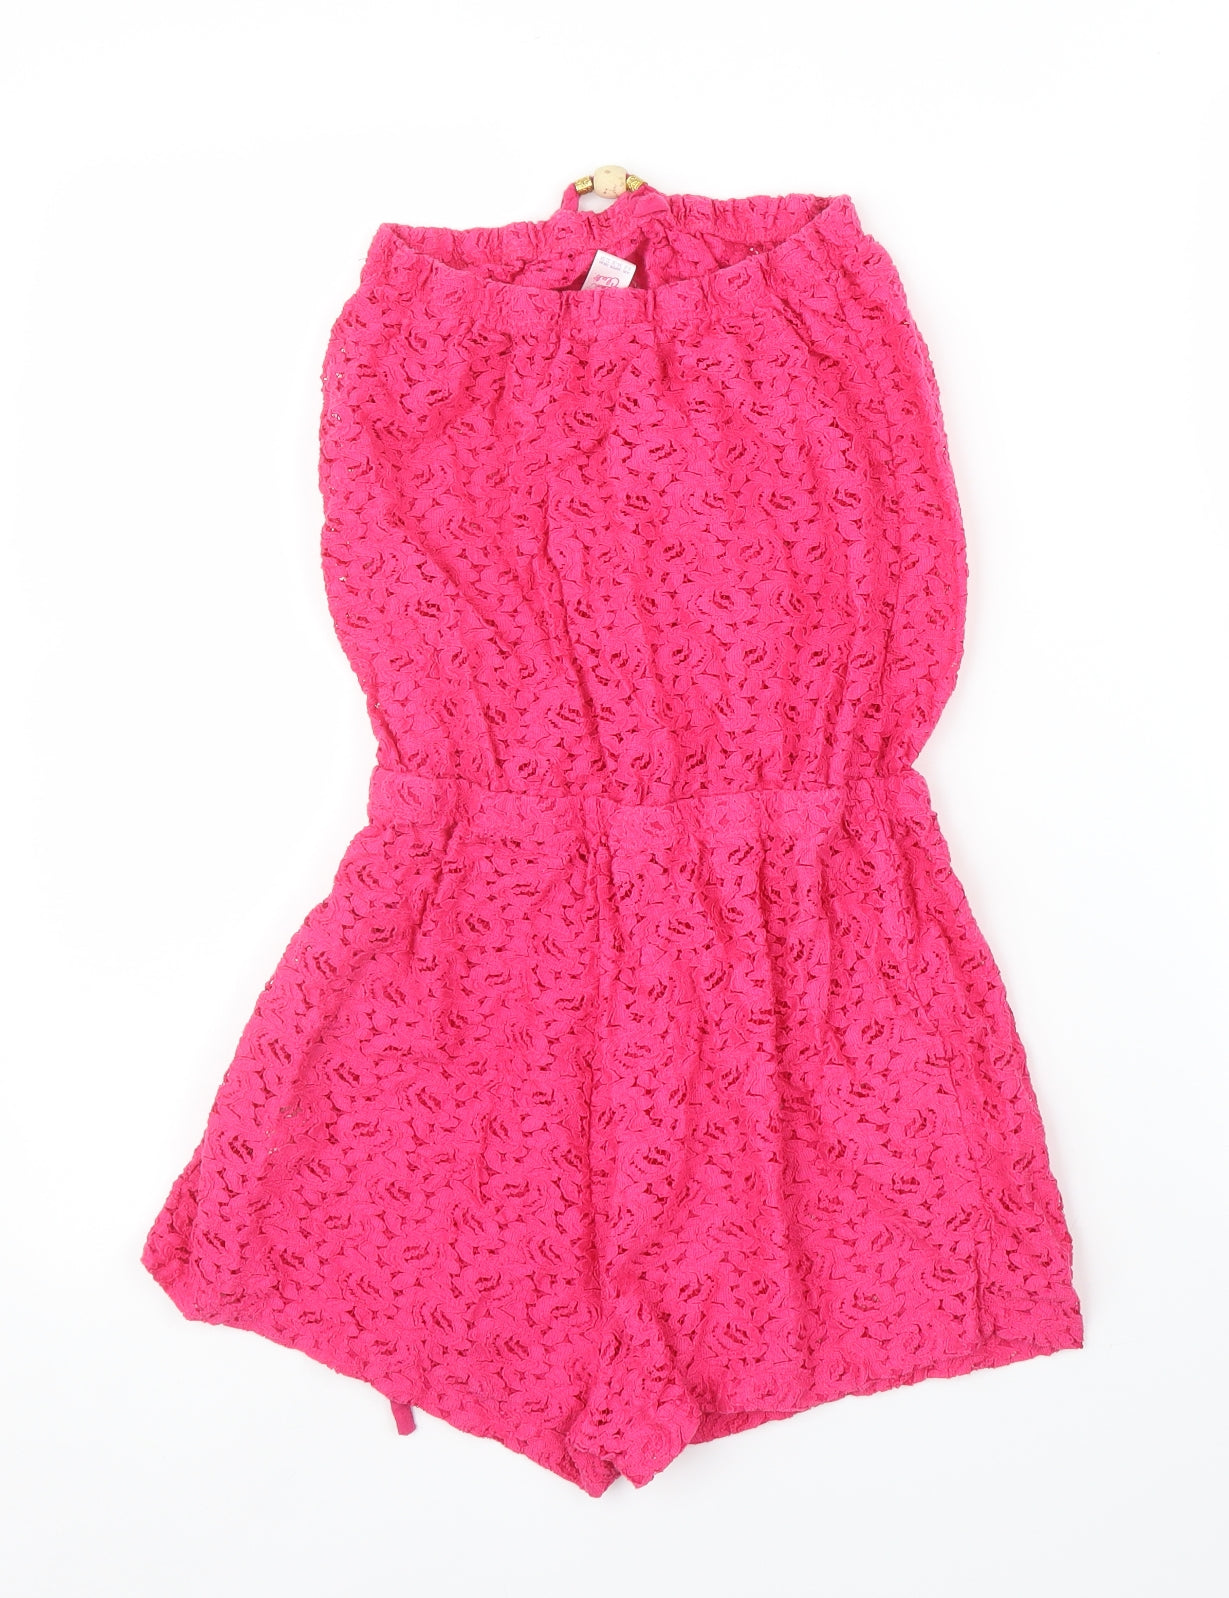 Primark Girls Pink Floral  Romper One-Piece Size 7 Years